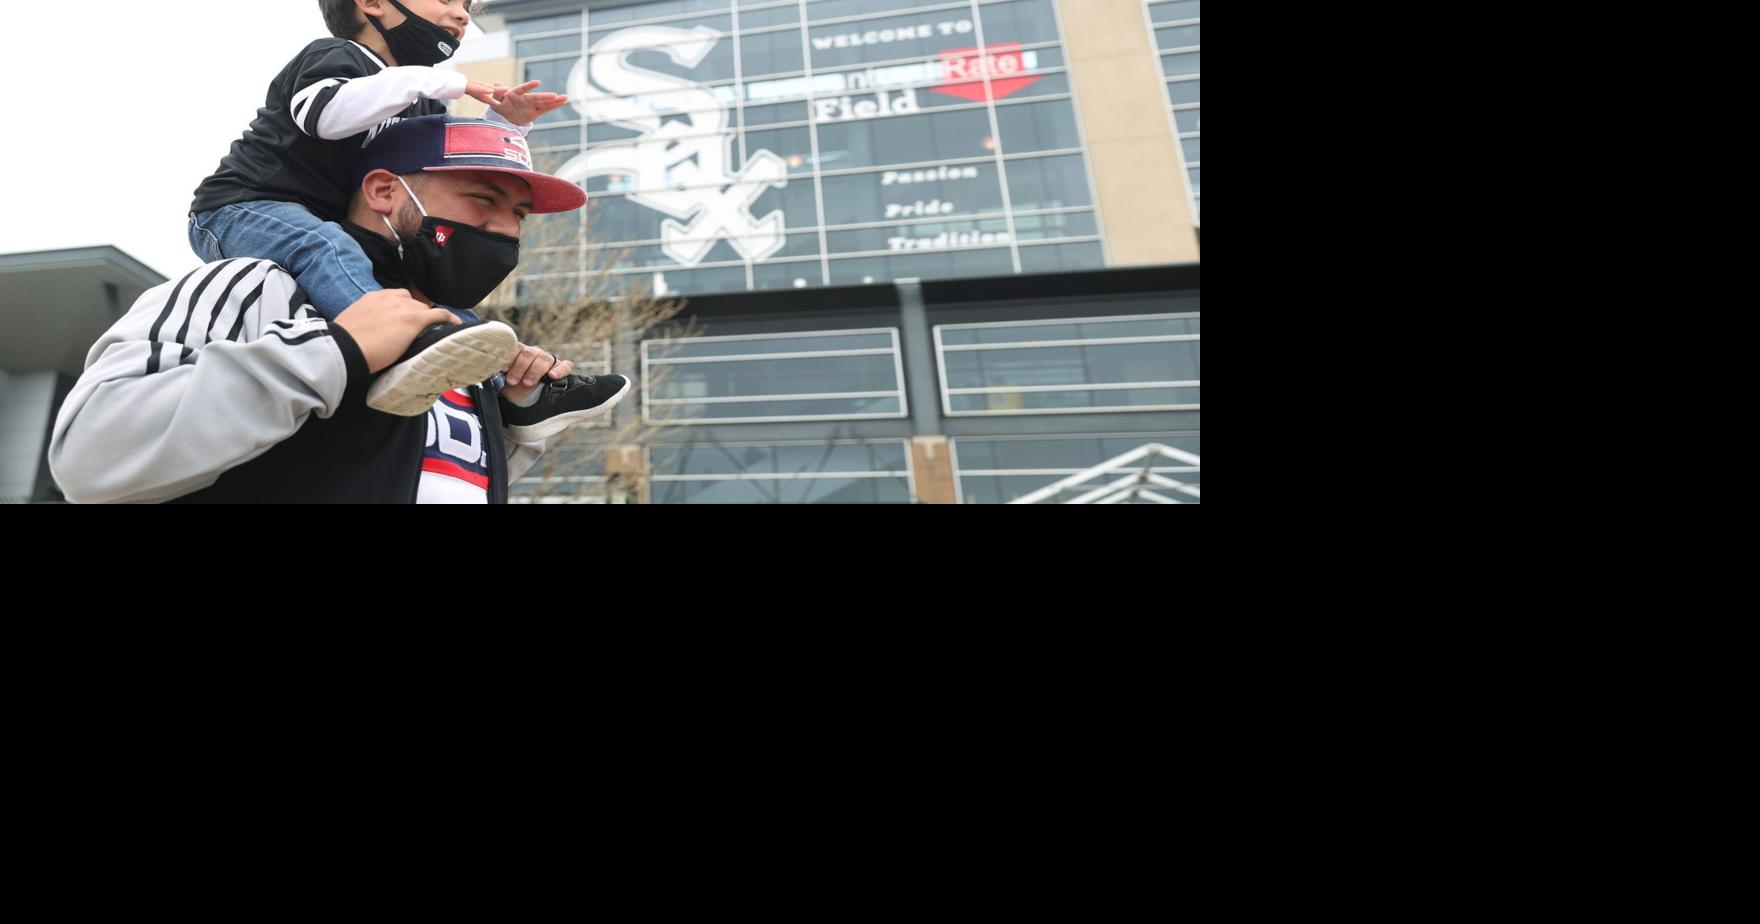 Chicago White Sox to require COVID vaccines for minor league players